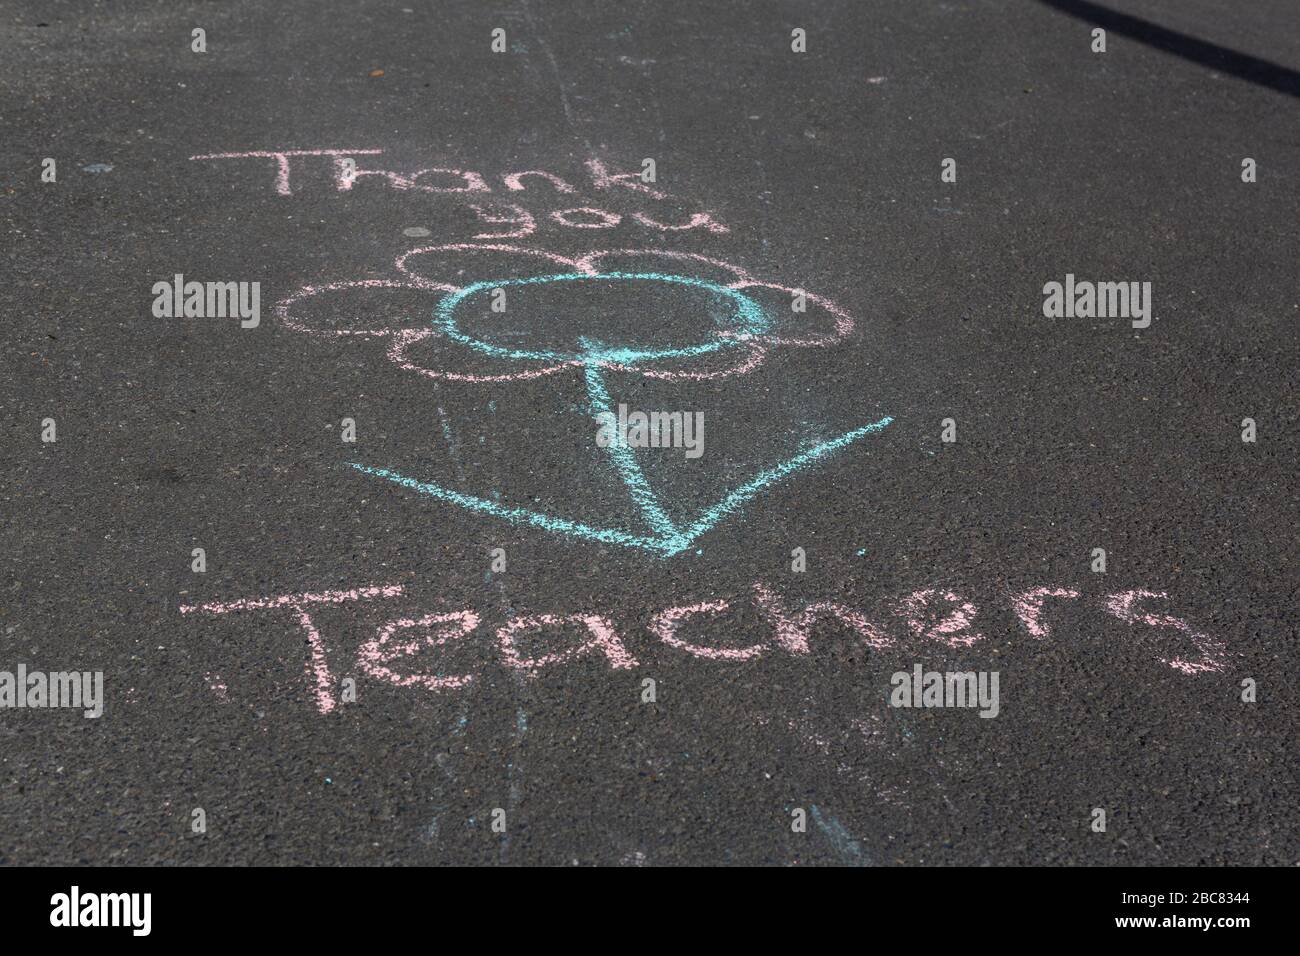 Carmarthen, UK. 3 April, 2020. Child's chalk graffiti on pavement saying Thank You Teachers as part of Clap for Carers initiative during Coronavirus pandemic lockdown in Wales, UK. Credit: Gruffydd Ll. Thomas/Alamy Live News Stock Photo